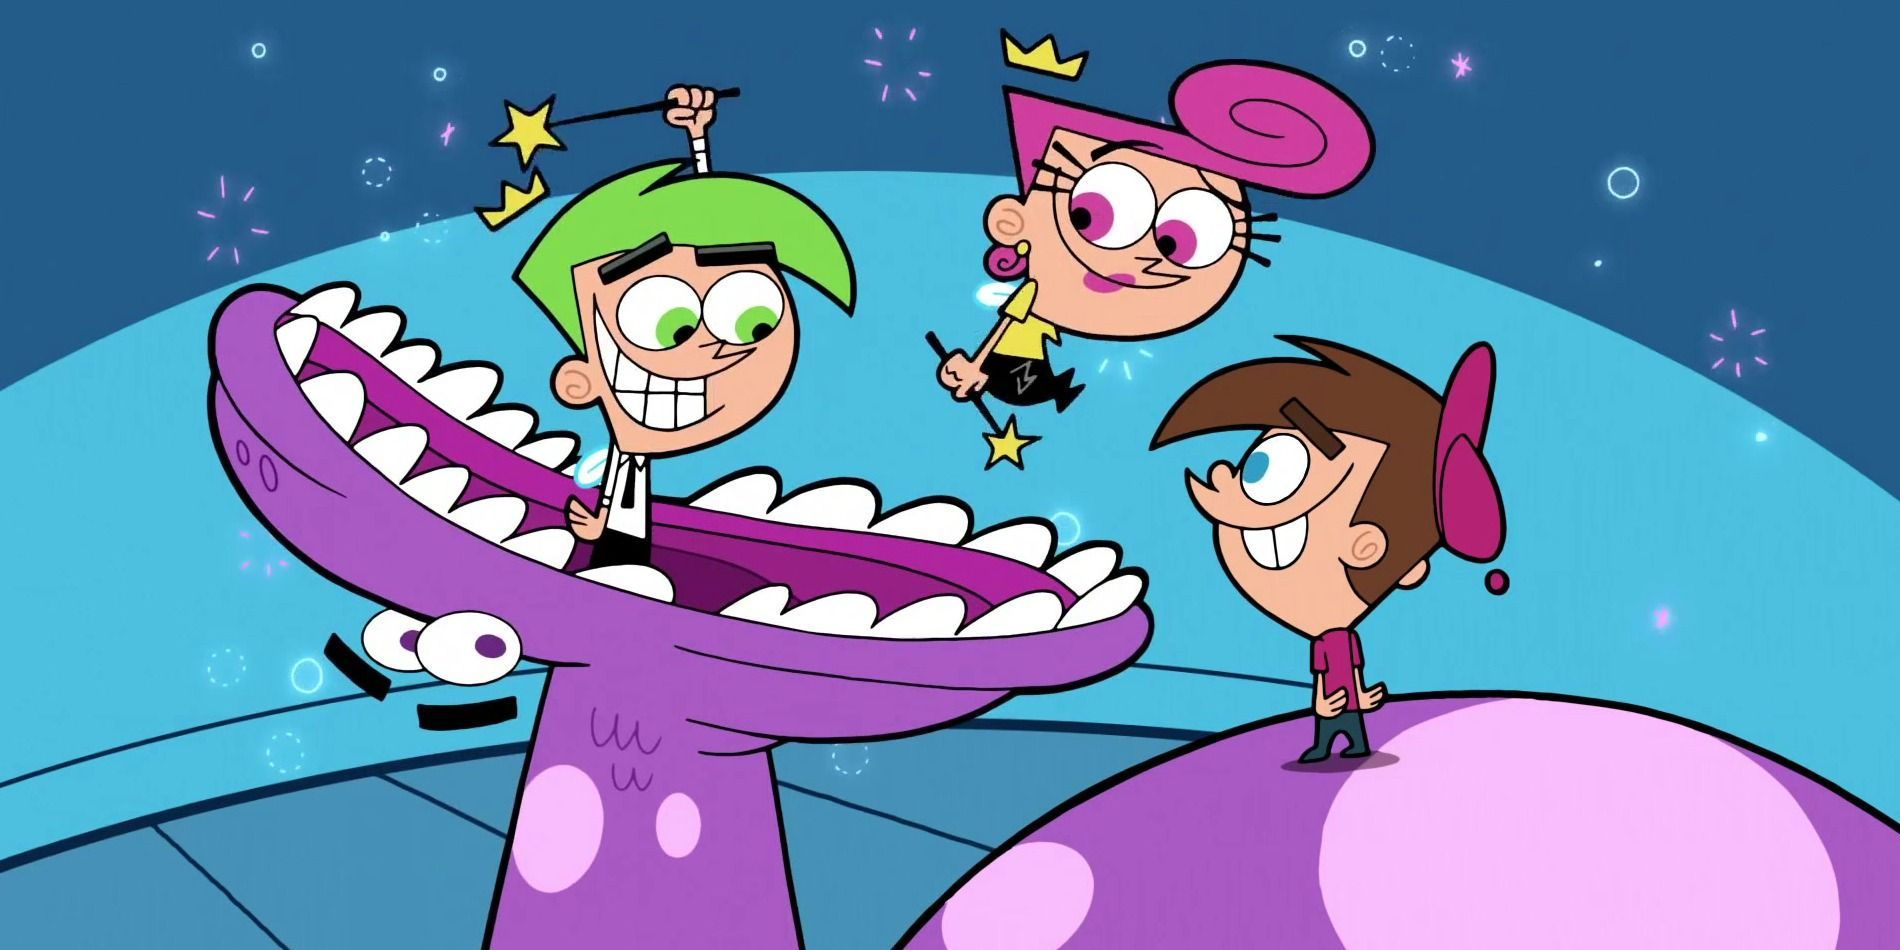 Fairly Oddparents on Nickelodeon